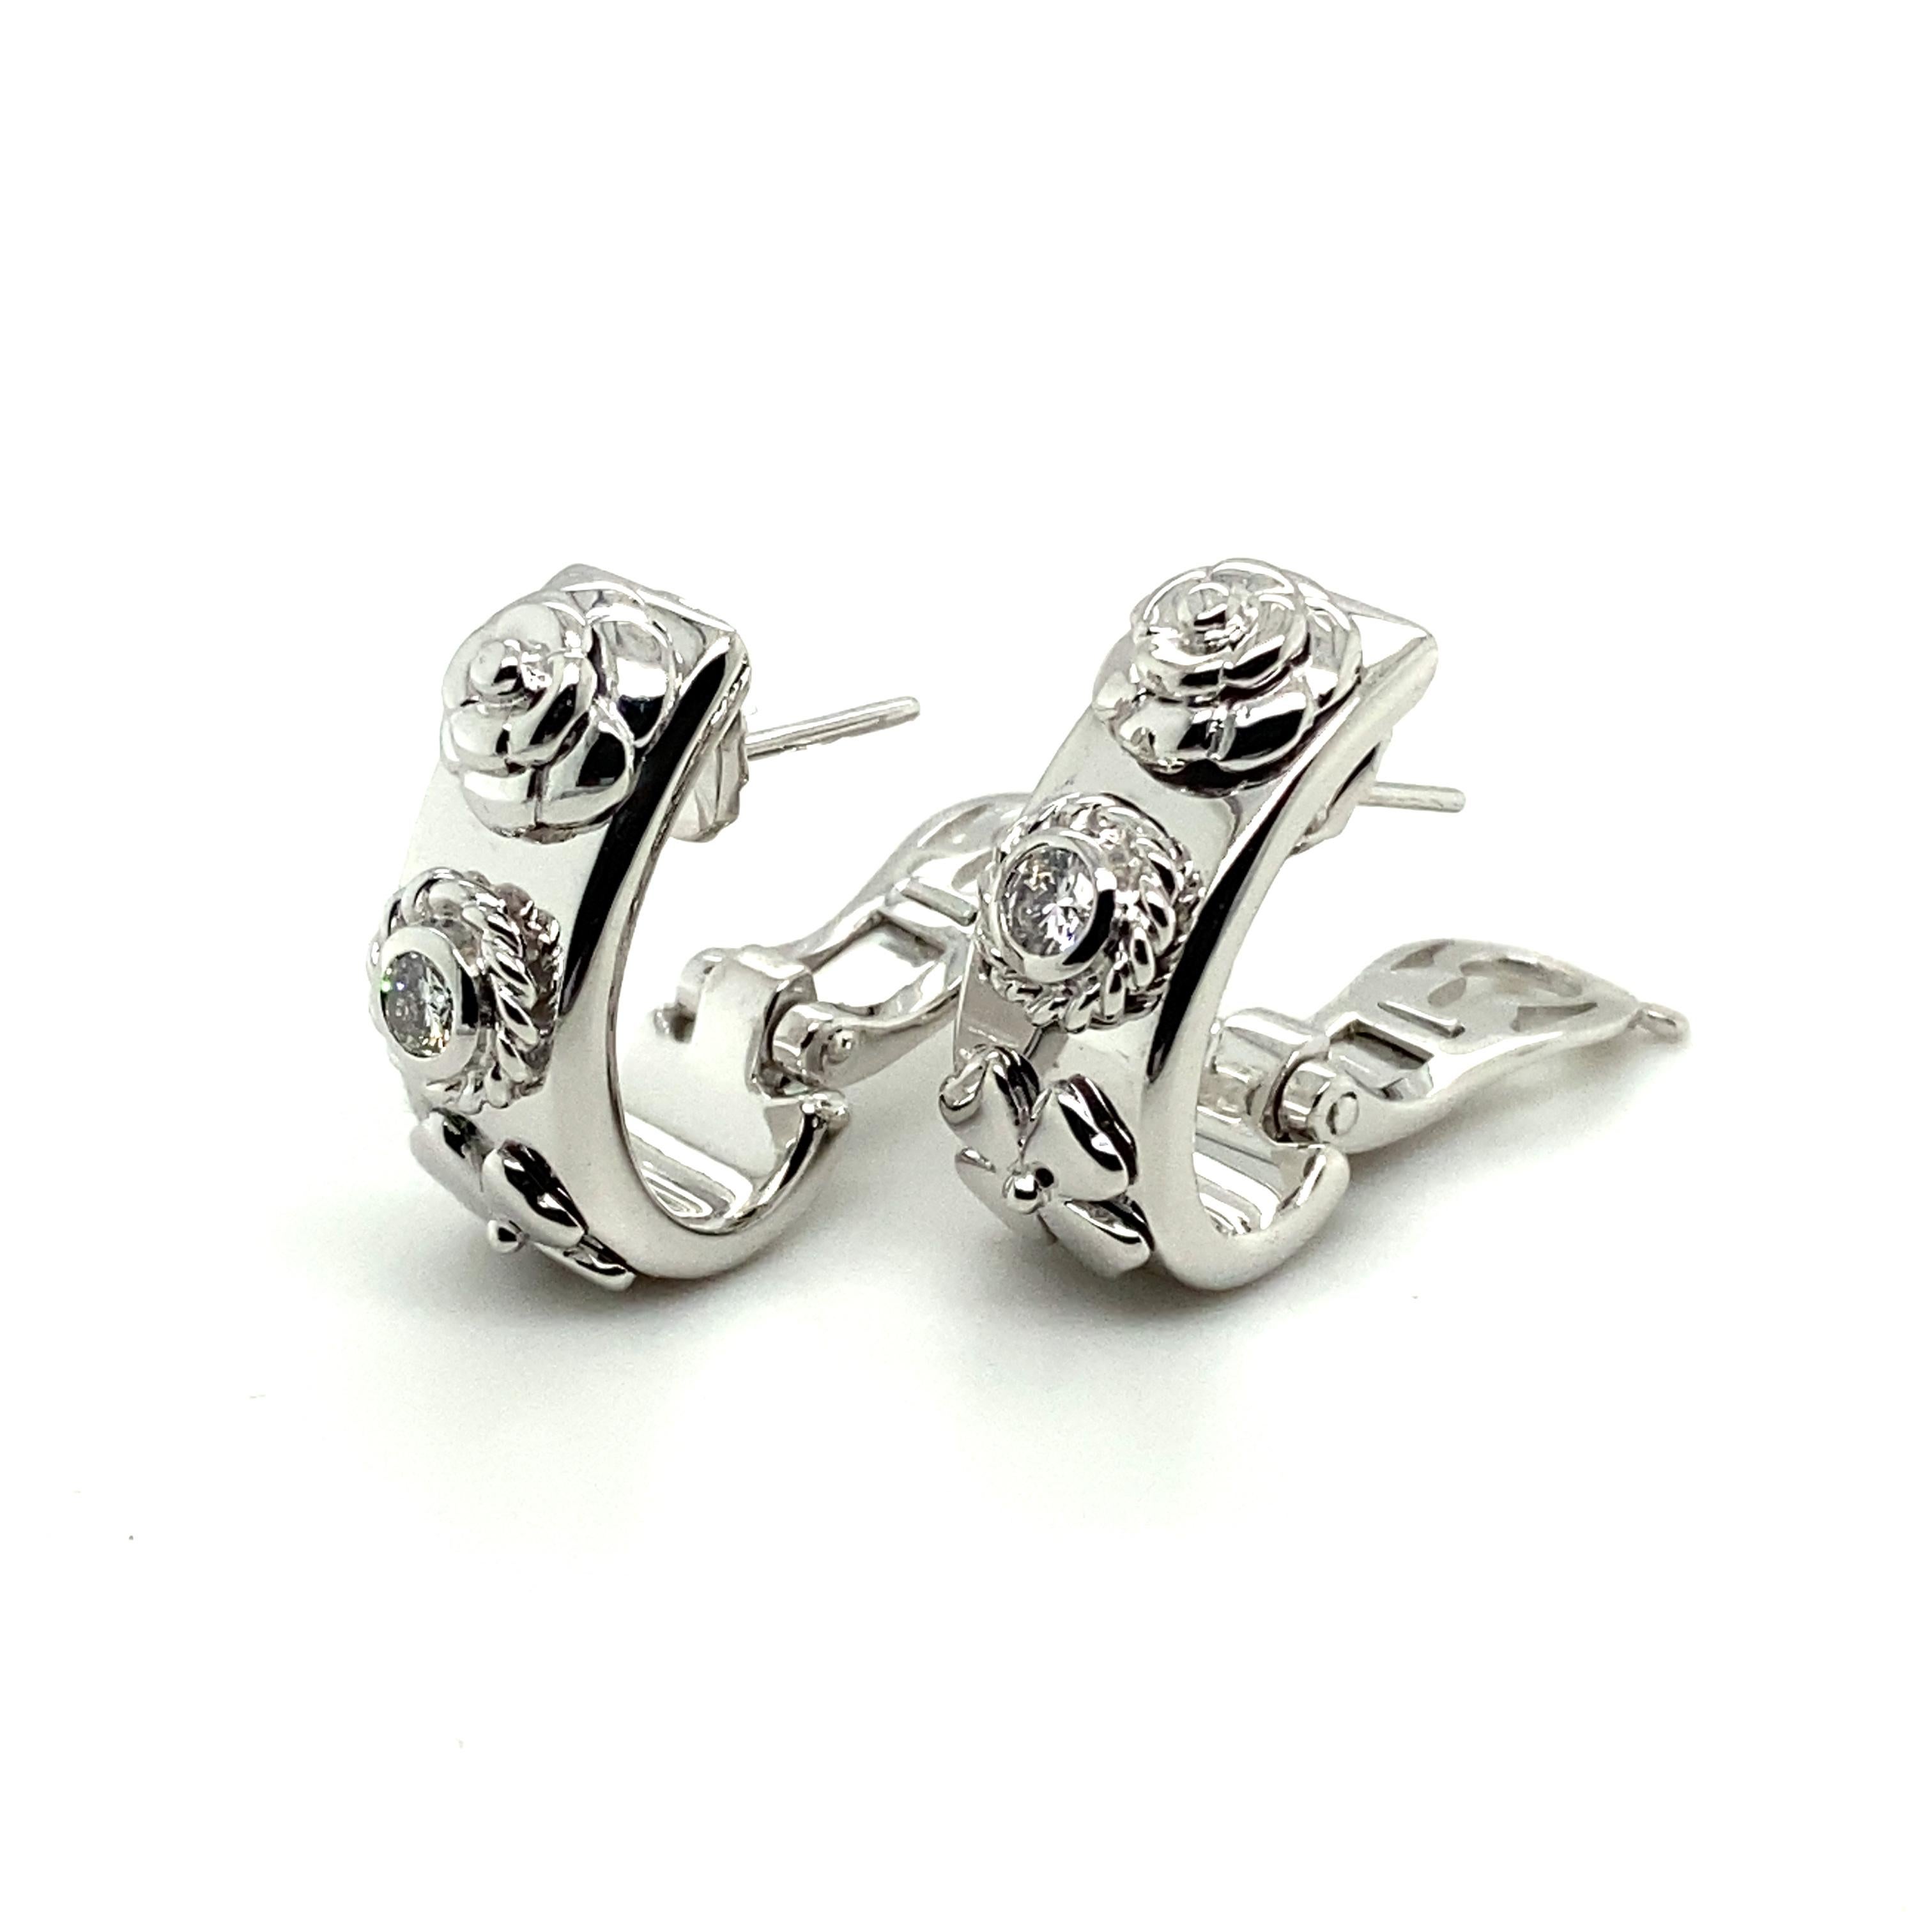 Chanel Diamond Four-Leaf Clovers and Camelia Earclips in 18 Karat White Gold 1